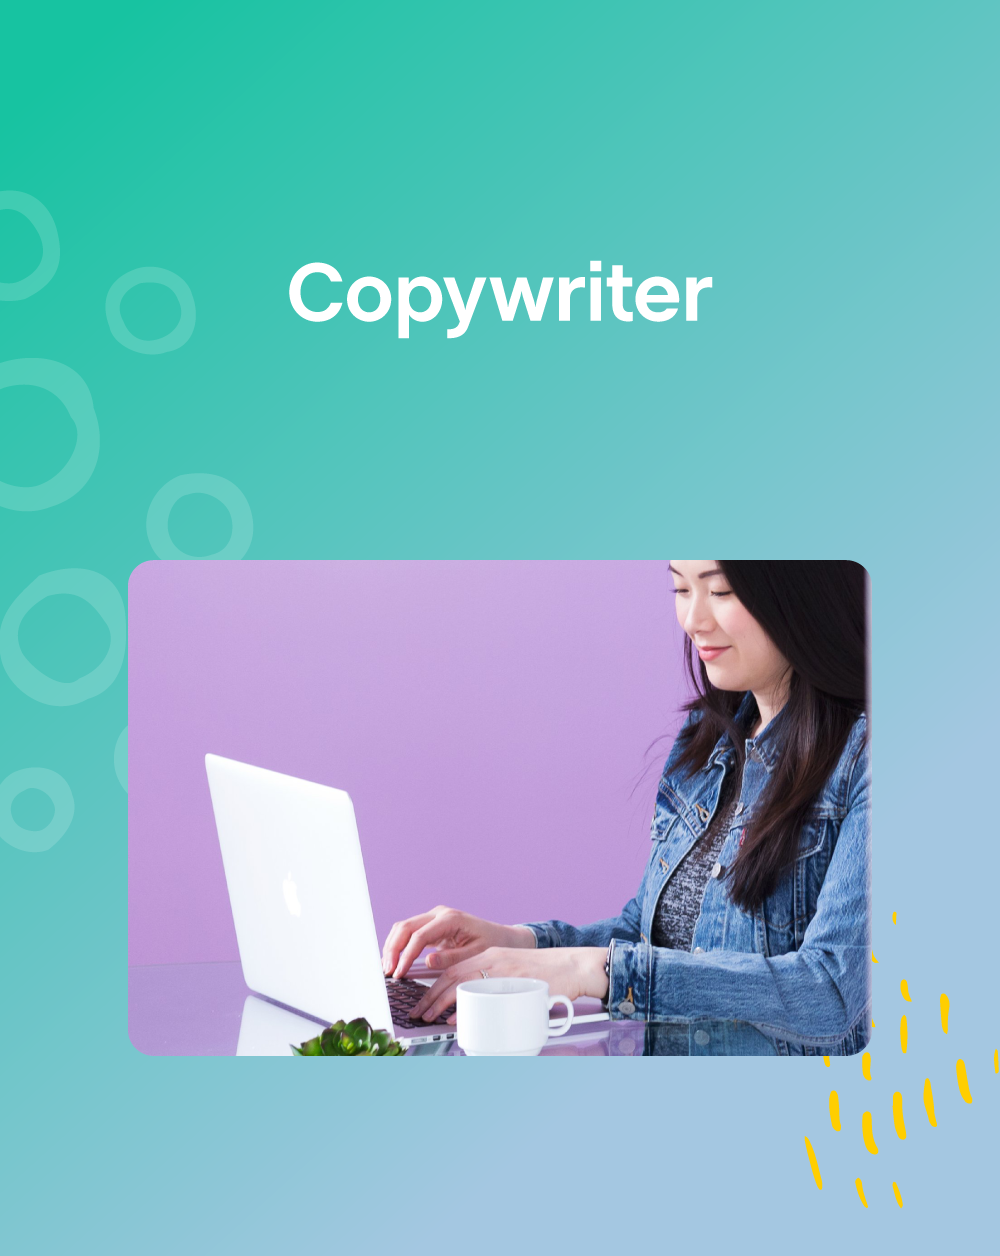 Copywriter Agreement Contract Template - The Contract Shop®